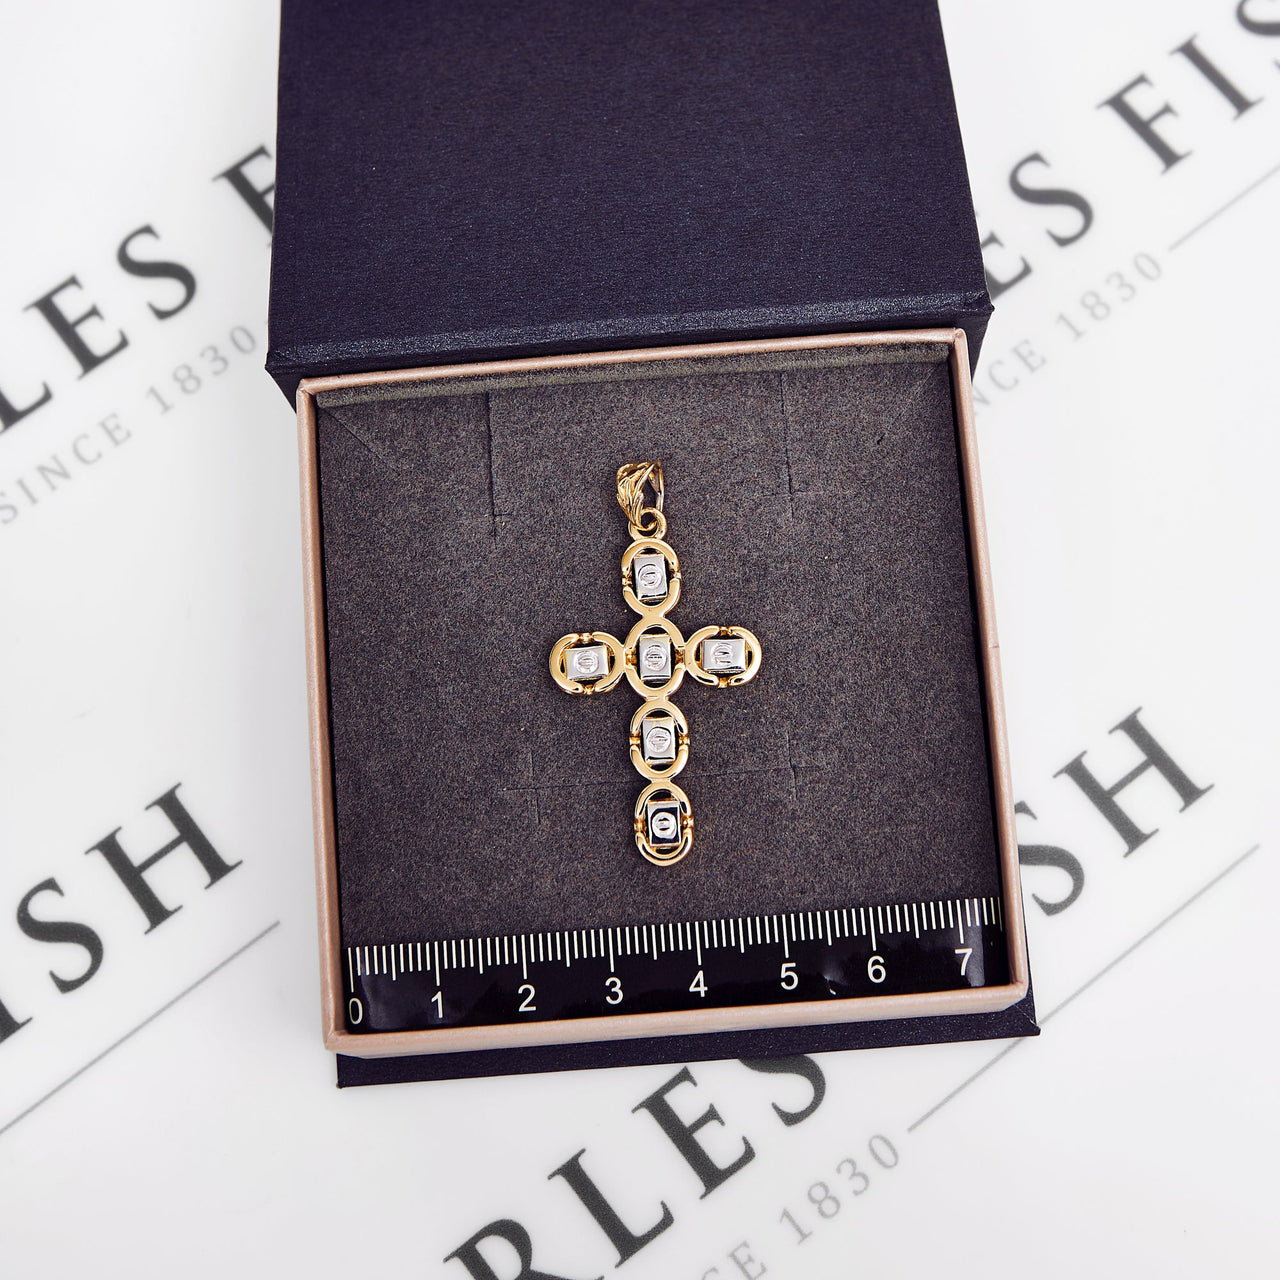 Pre-Owned 9ct Gold Two Tone Screw Design Cross Pendant